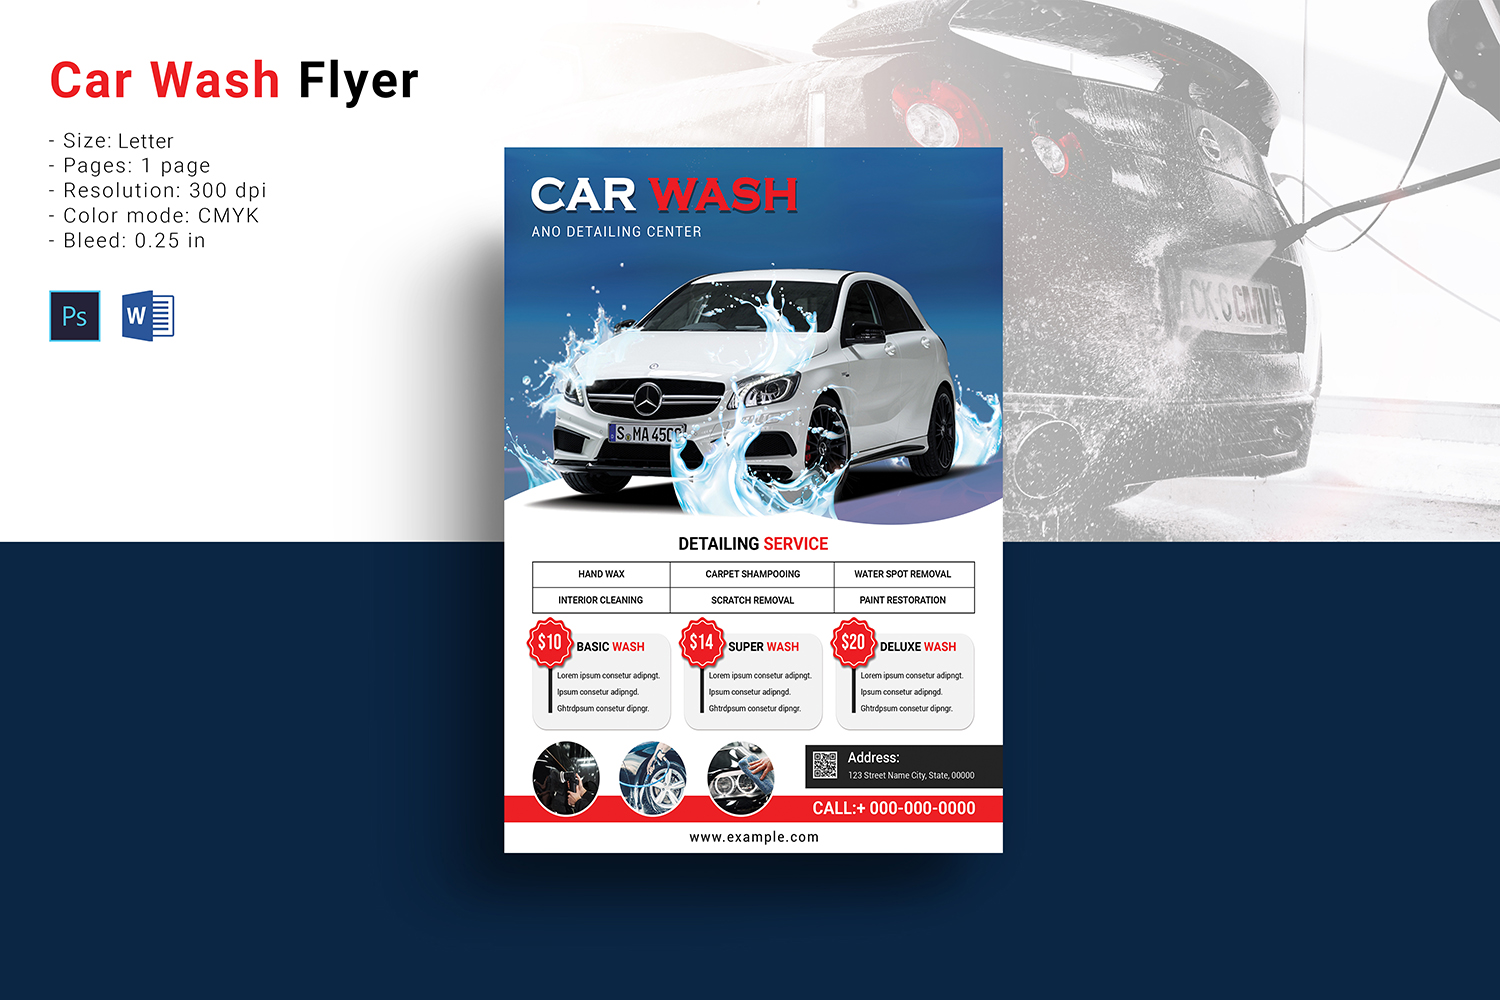 Car Wash Flyer - Corporate Identity Template